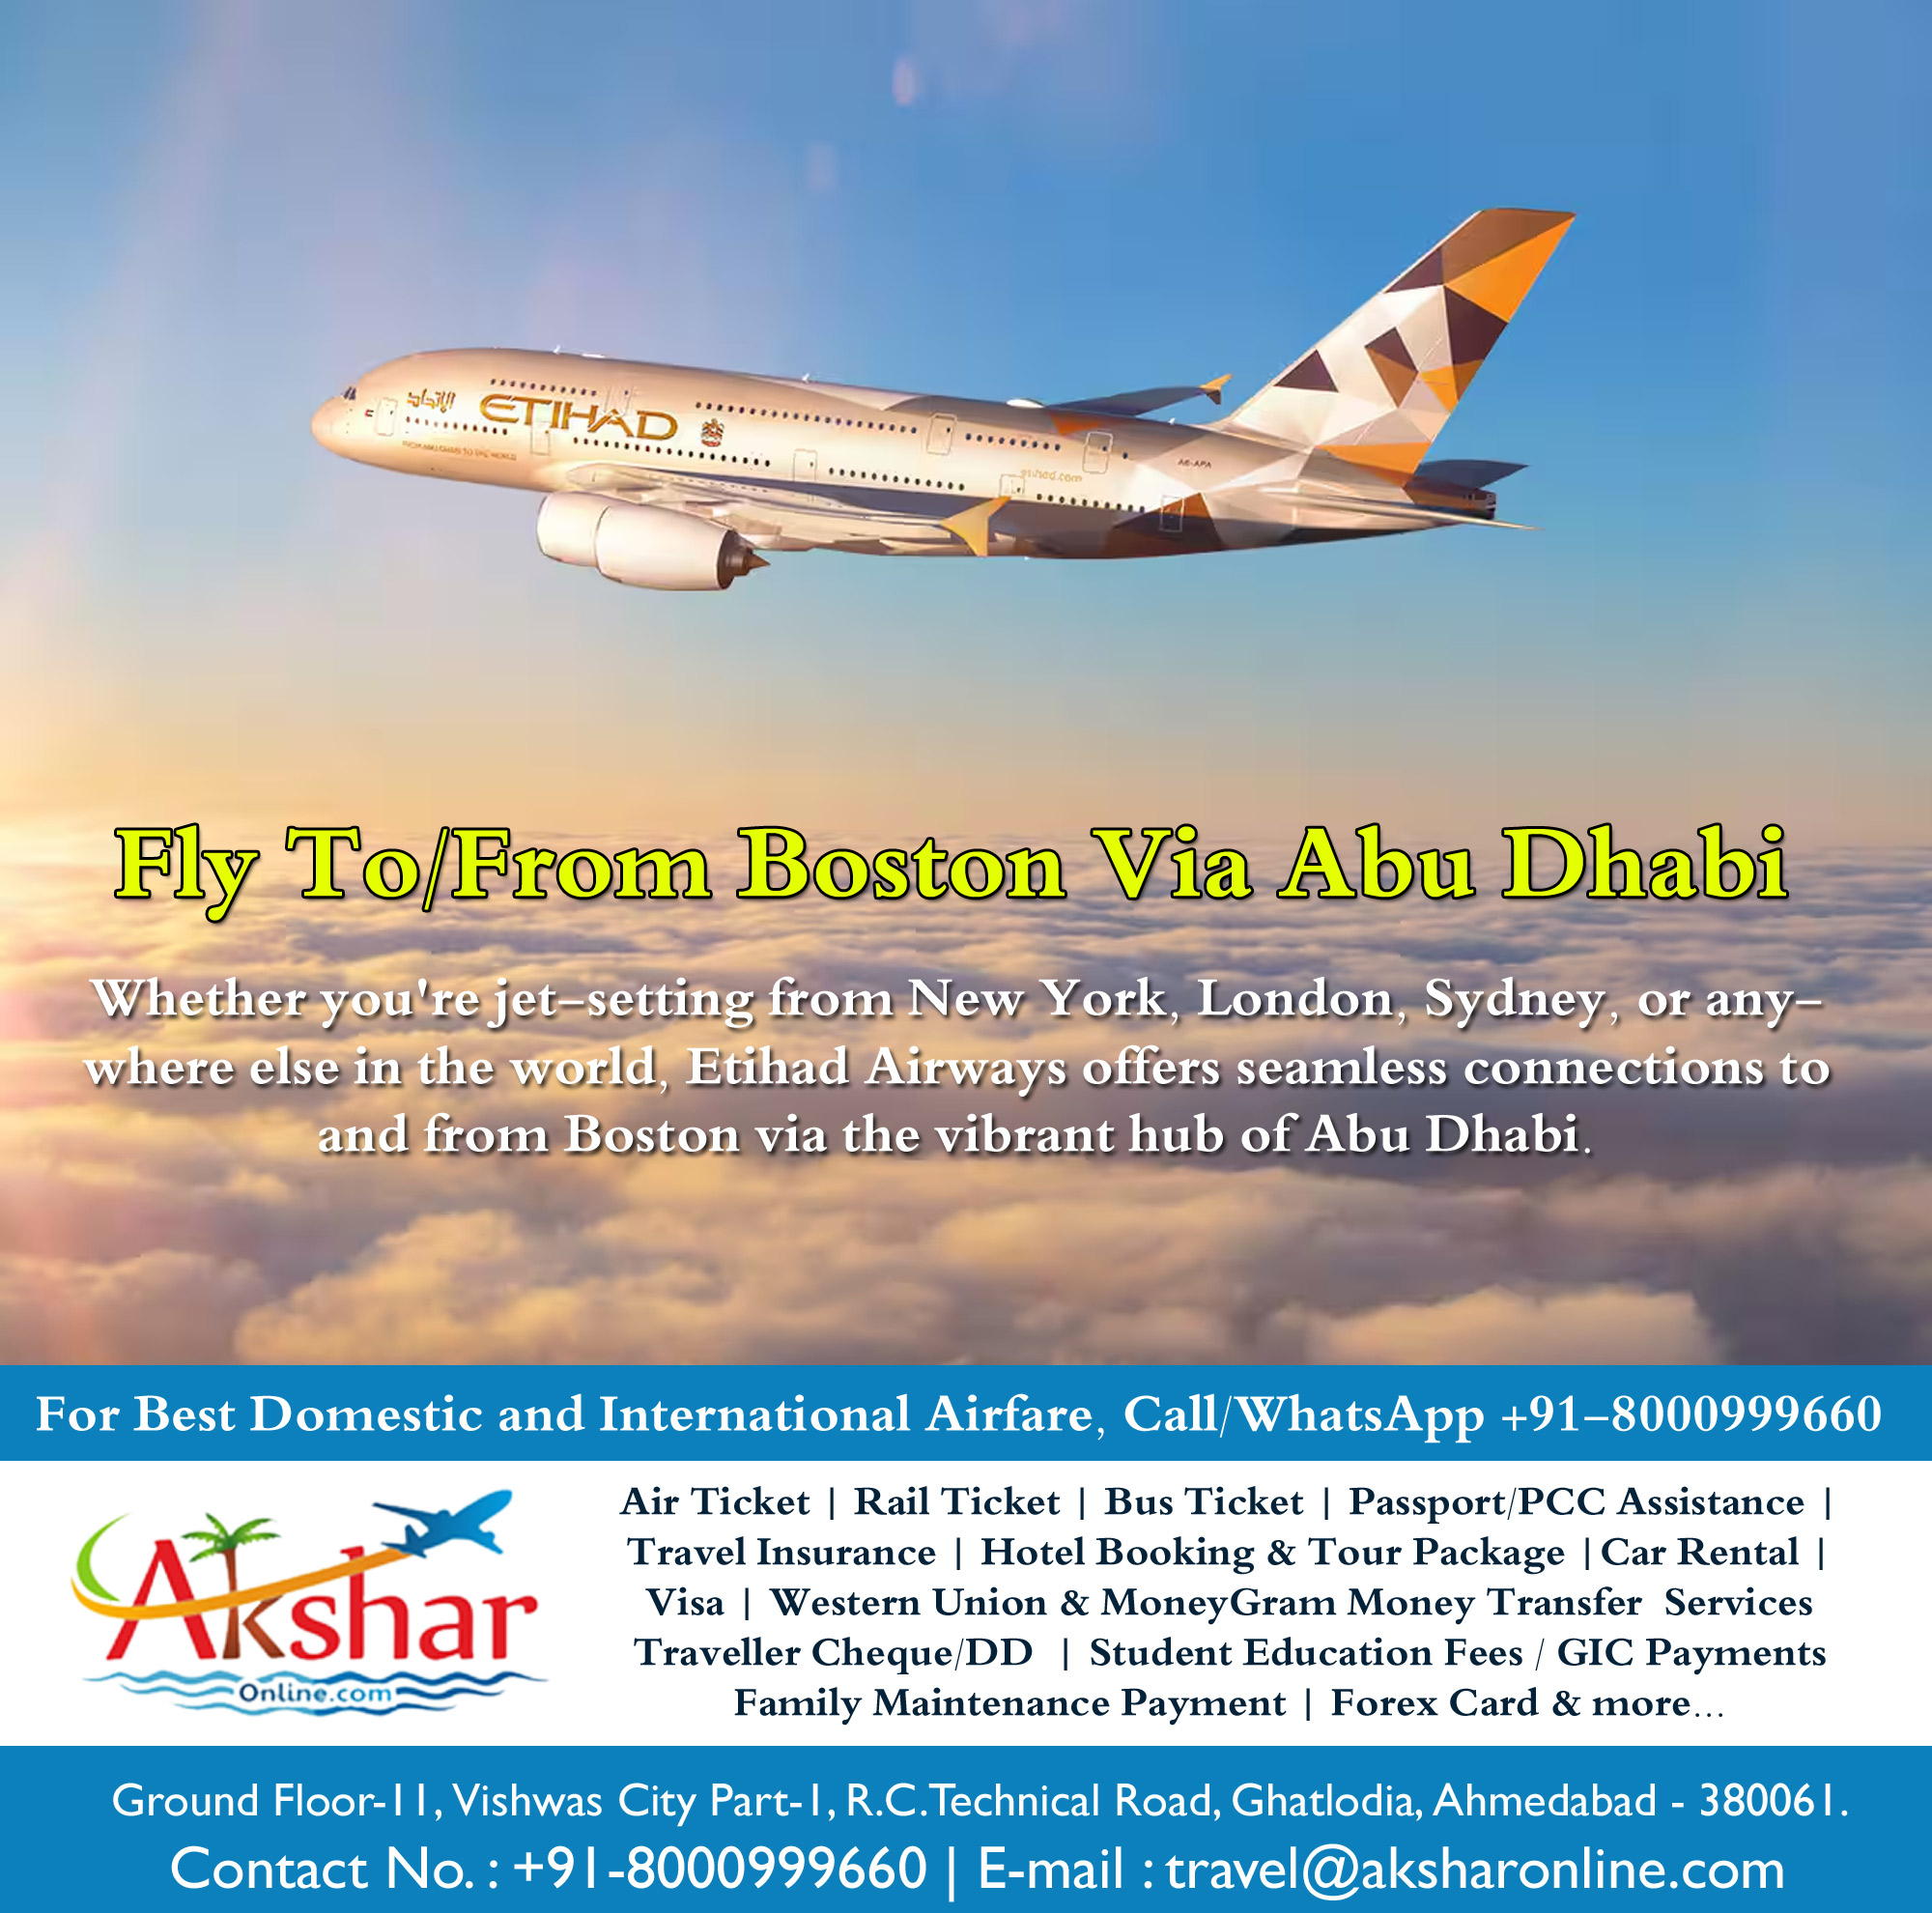 🌍✈️ Dreaming of Boston? Fly with Etihad Airways via Abu Dhabi from Anywhere in the World! ✈️🌍  Experience seamless travel to the vibrant city of Boston with Etihad Airways, connecting you from major cities worldwide through the bustling hub of Abu Dhabi!  🌟 Why Choose Etihad Airways?  Award-winning service Comfortable cabins Generous baggage allowance Delectable cuisine World-class entertainment 📞 WhatsApp/Call us now on +91-8000999660 for the Best Deals and Exclusive Offers! Don't miss out on our unbeatable fares!  ✈️ Book Your Journey Today and let your adventure begin!  #EtihadAirways #Boston #AbuDhabi #TravelGoals #AdventureAwaits #FlyWithUs, Jet-set to Boston via Abu Dhabi with Etihad Airways! Experience luxury travel worldwide. WhatsApp/Call for exclusive deals: +91-8000999660 ✈️🌍 #EtihadAirways #Boston #AbuDhabi